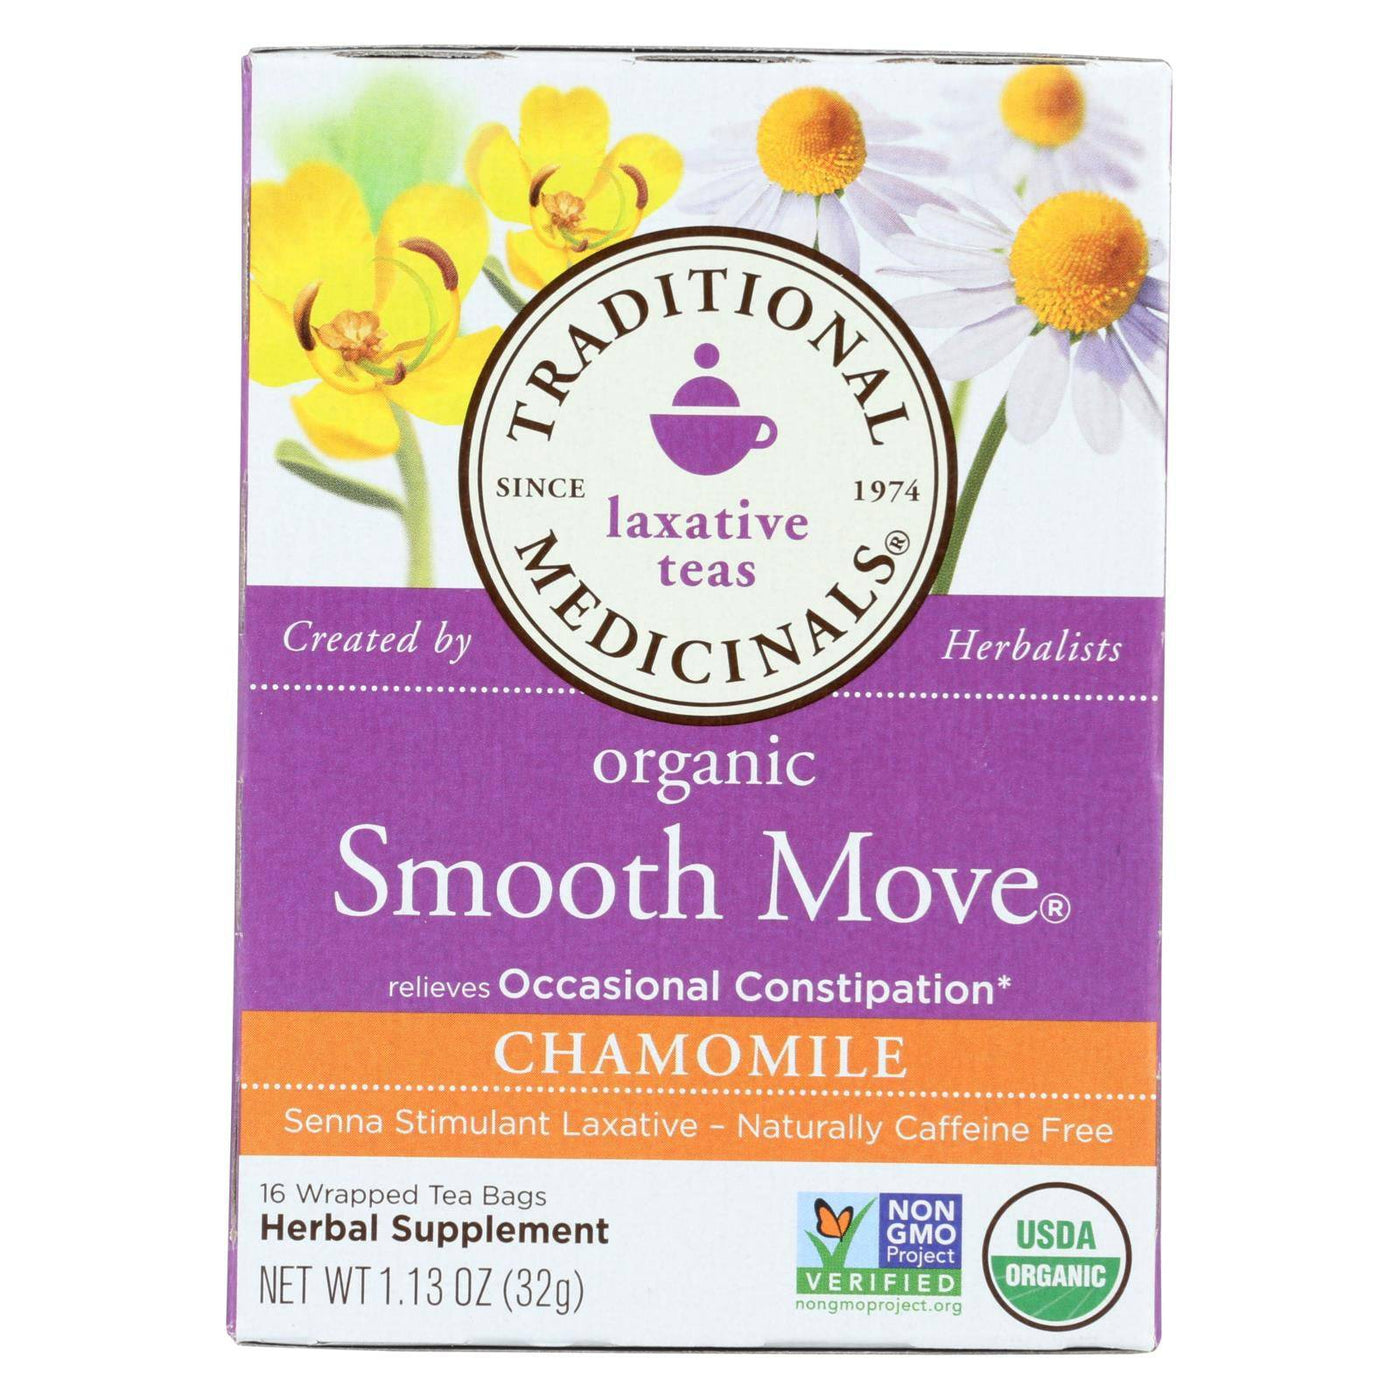 Buy Traditional Medicinals Organic Smooth Move Chamomile Herbal Tea - 16 Tea Bags - Case Of 6  at OnlyNaturals.us